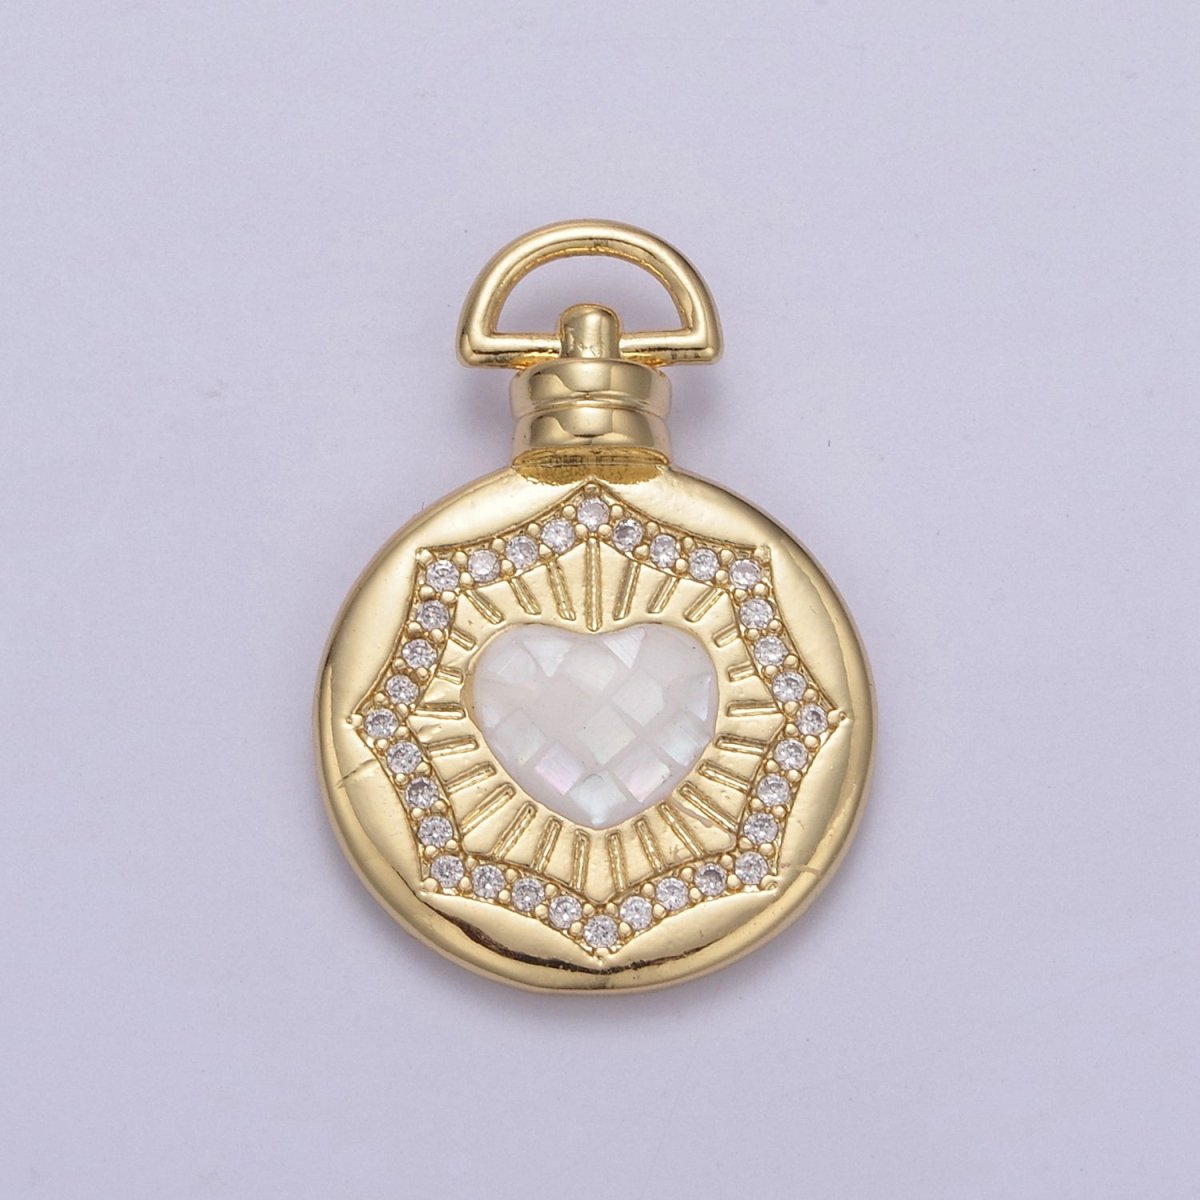 Dainty Gold Pink Shell Heart Pendant Micro Pave Round Medallion Pink / White Shell Valentine Jewelry Making H-700 H-706 - DLUXCA